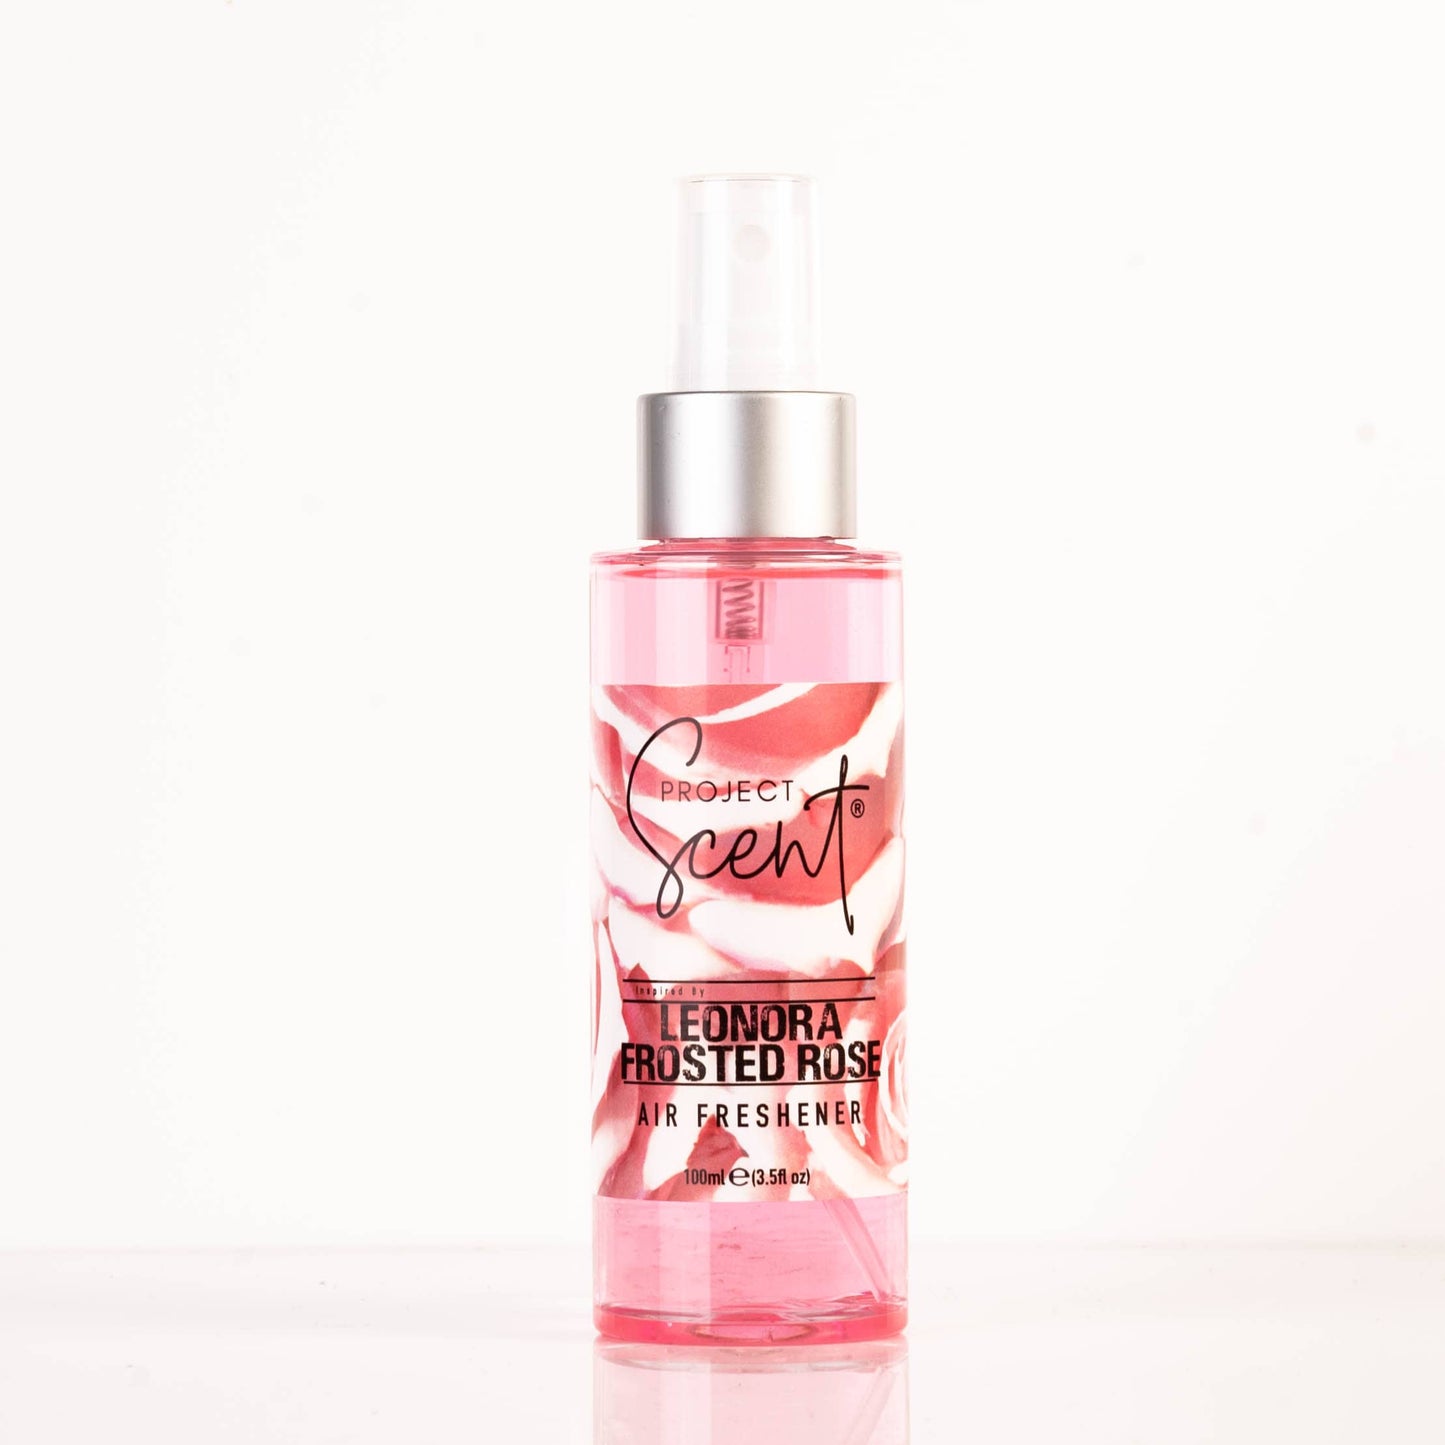 Project Scent Air Freshener Spray 100ml